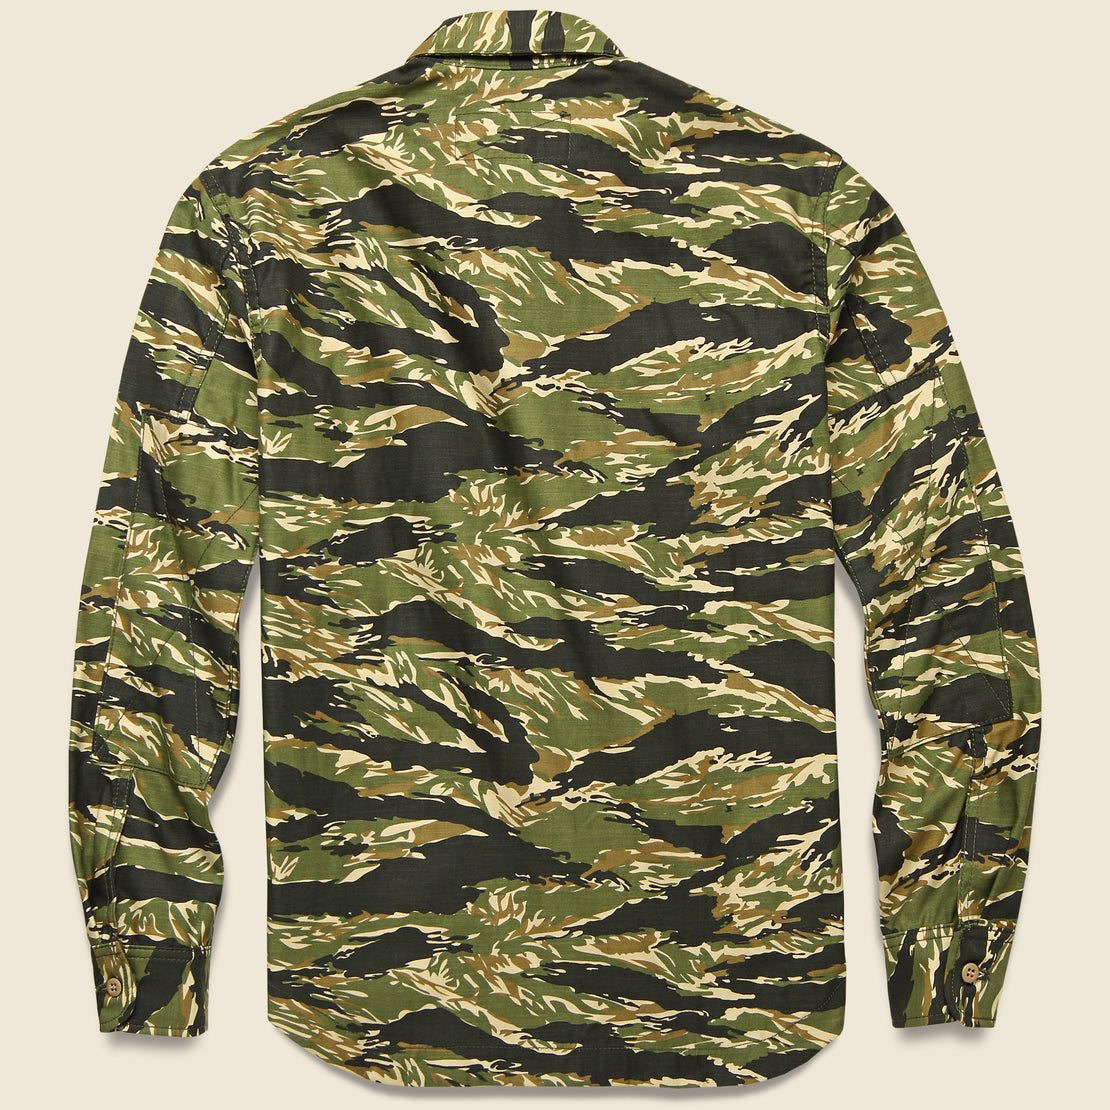 Patrol Work Shirt - Tiger Camo - Rogue Territory - STAG Provisions - Outerwear - Coat / Jacket